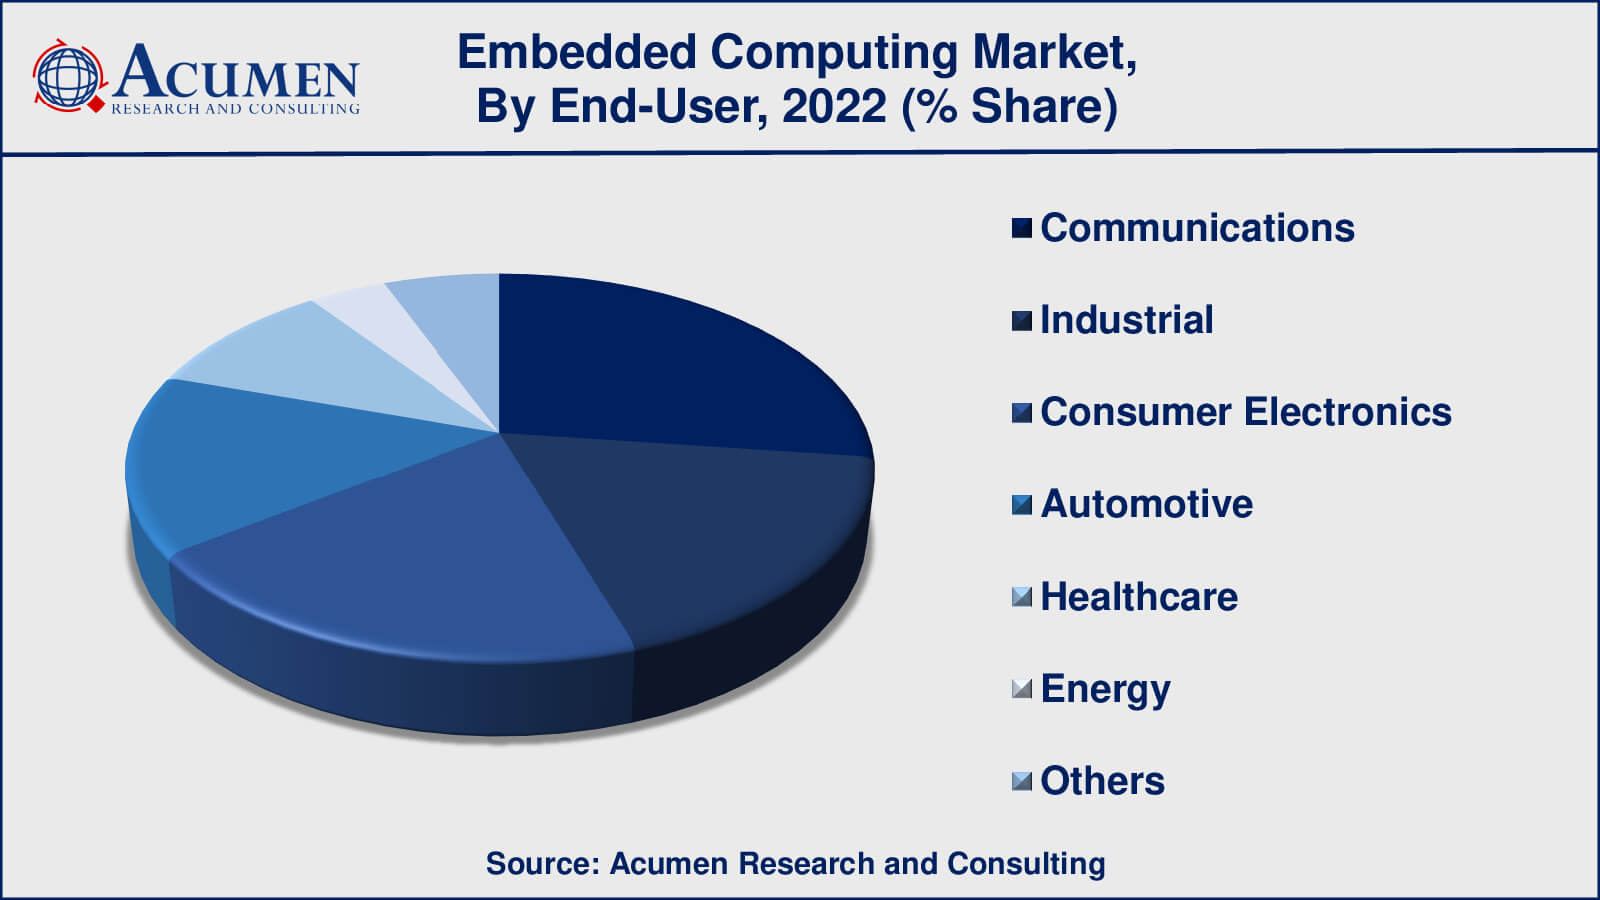 Embedded Computing Market Drivers